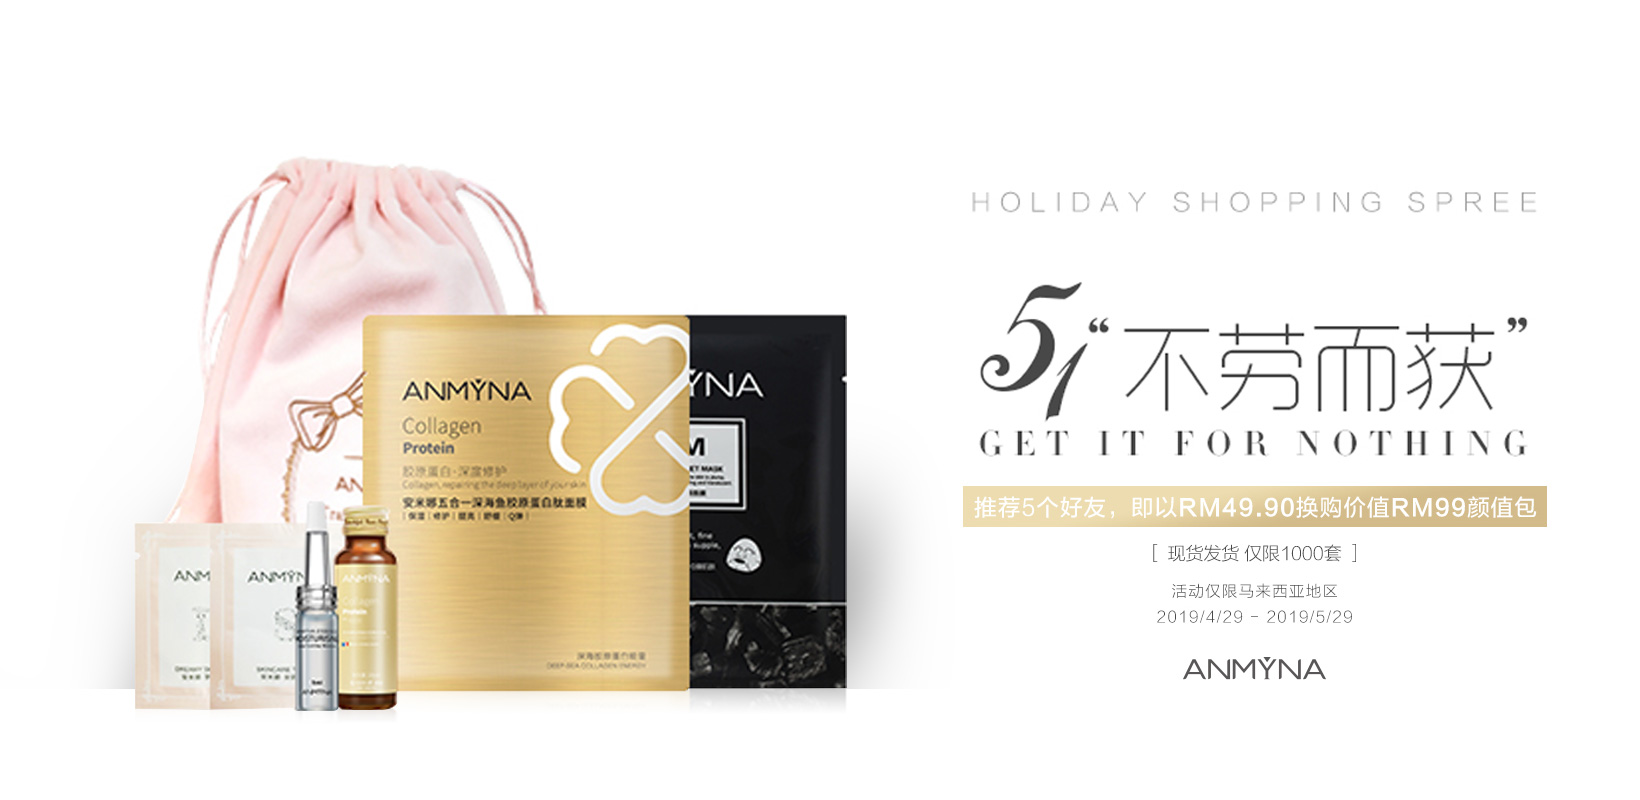 Labour Day, 51 Holiday, Anmyna, Shopping Spree, Anmyna Packages, Black Mask, Collagen Mask, Collagen Drinks, Essence, Toner Sample, Emulsion, Pink Pouch,